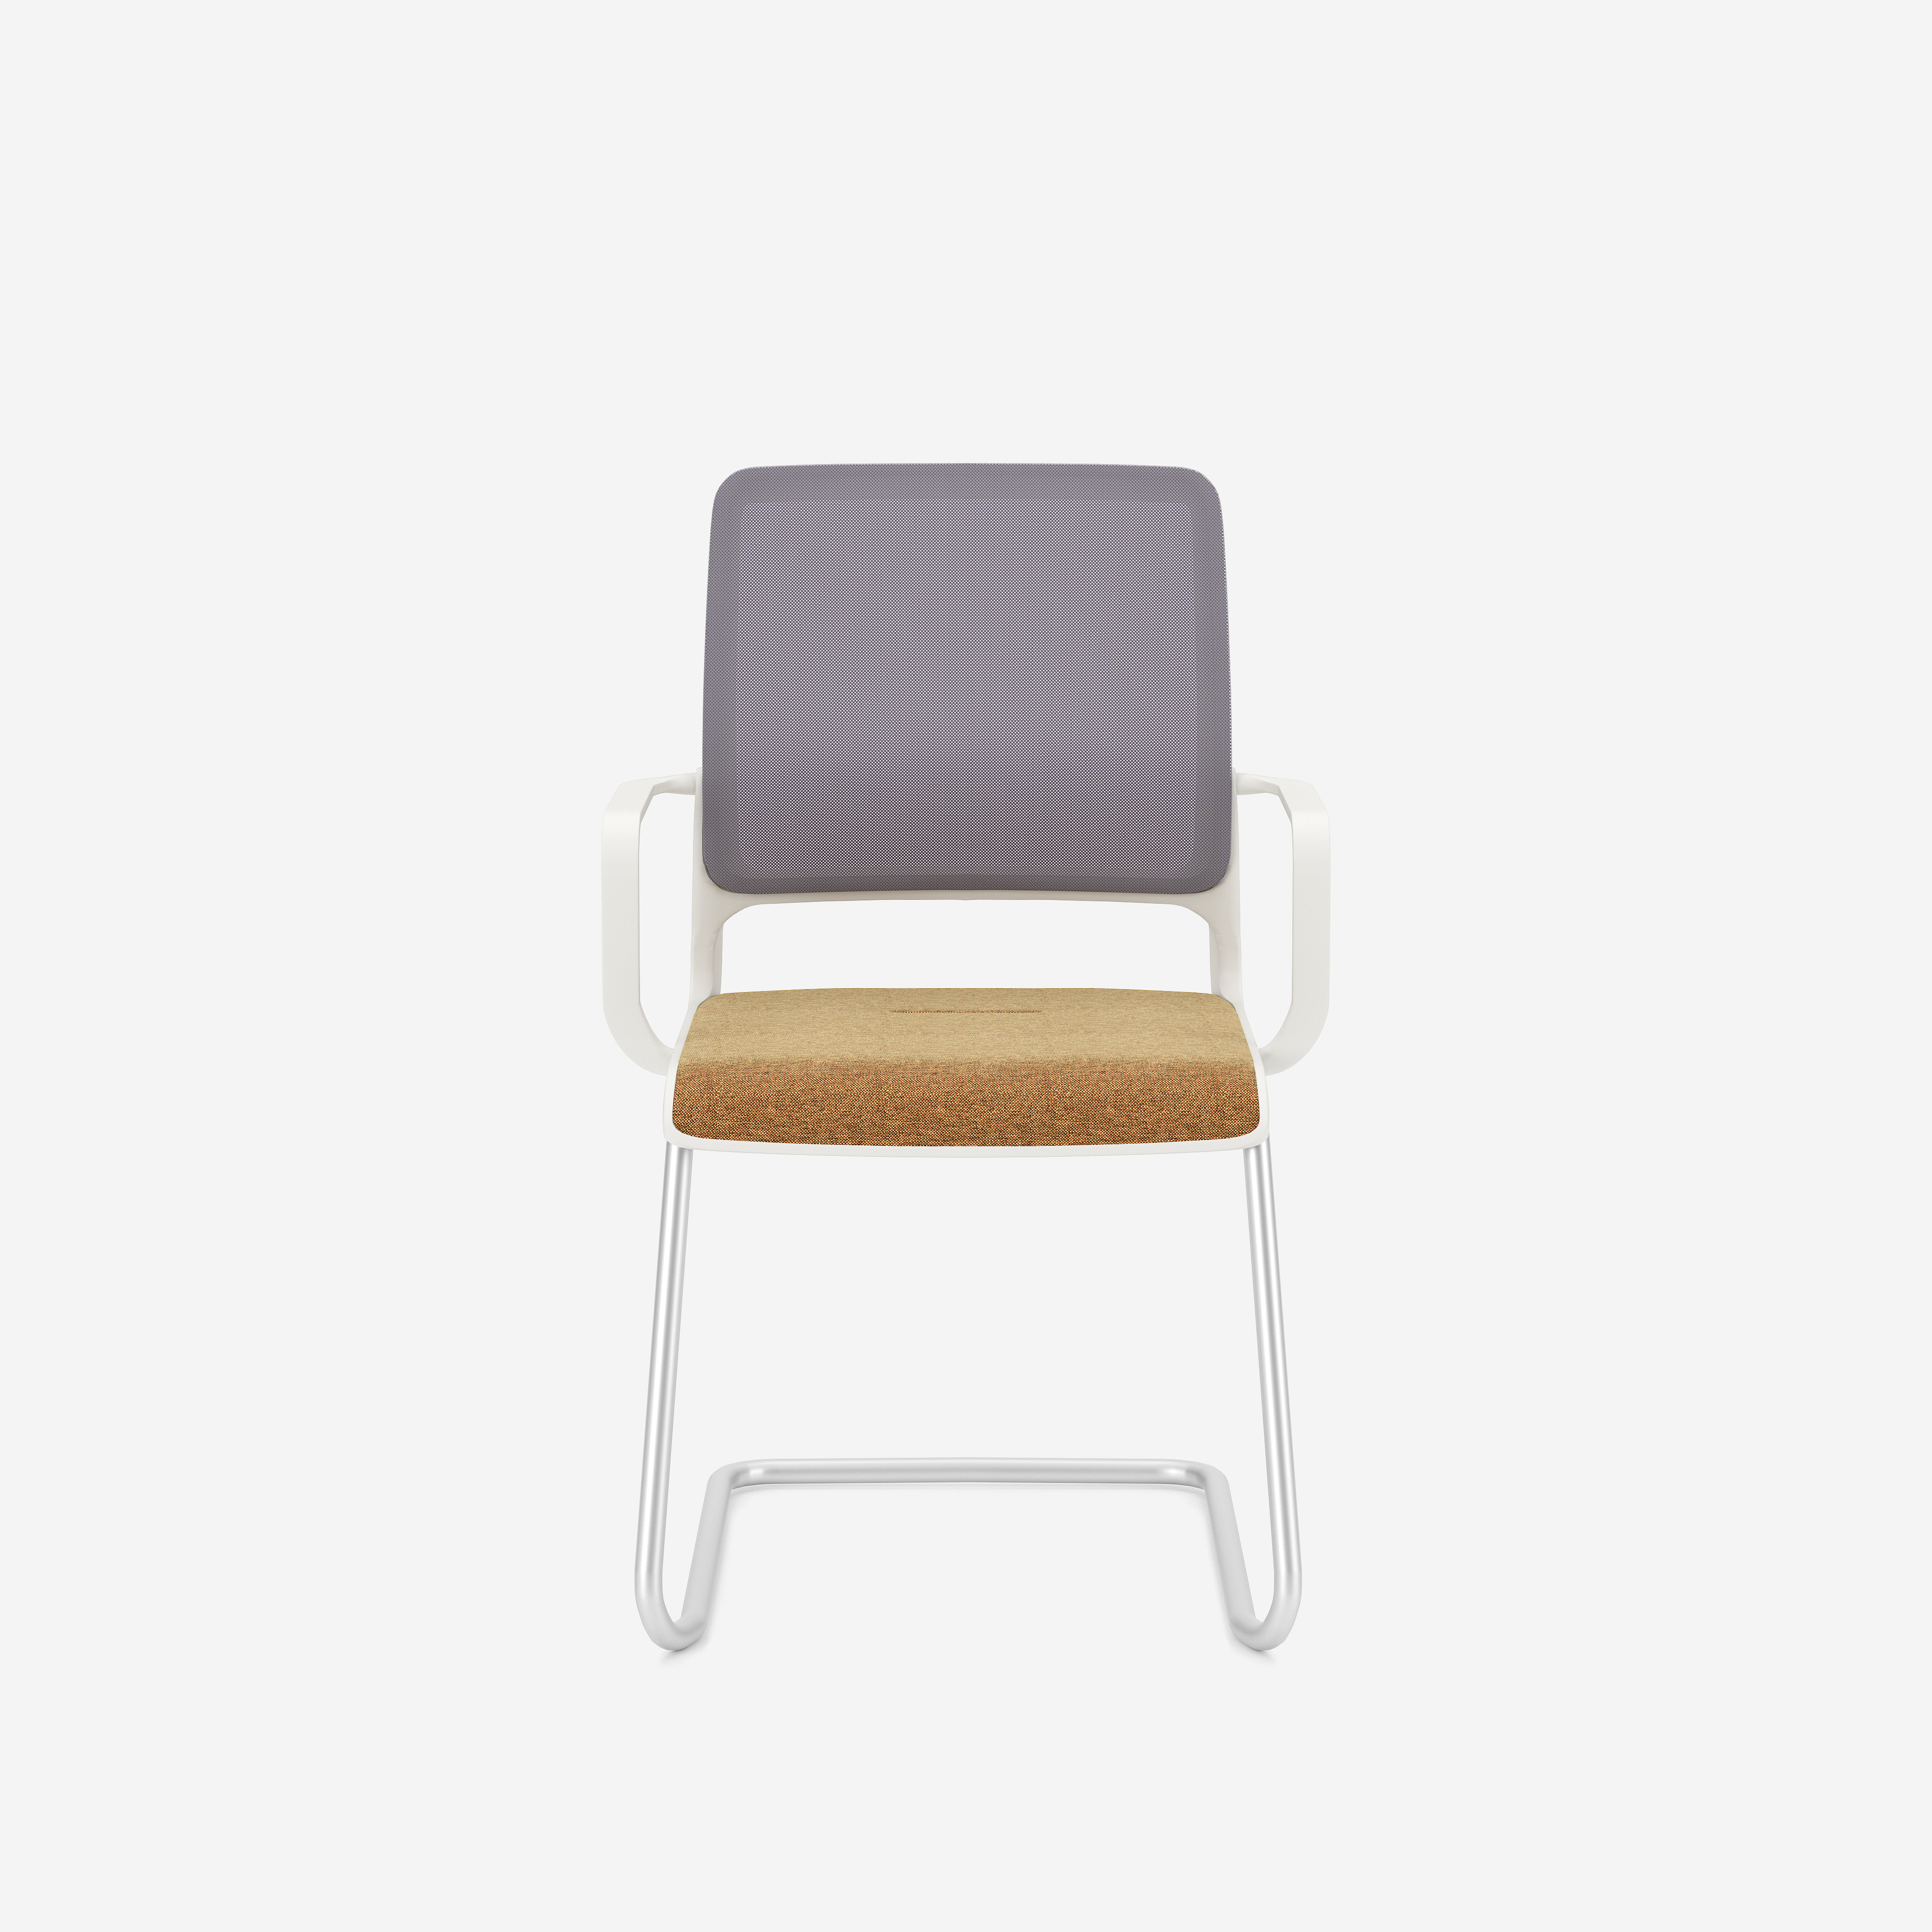 Meeting chairs | Nowy Styl